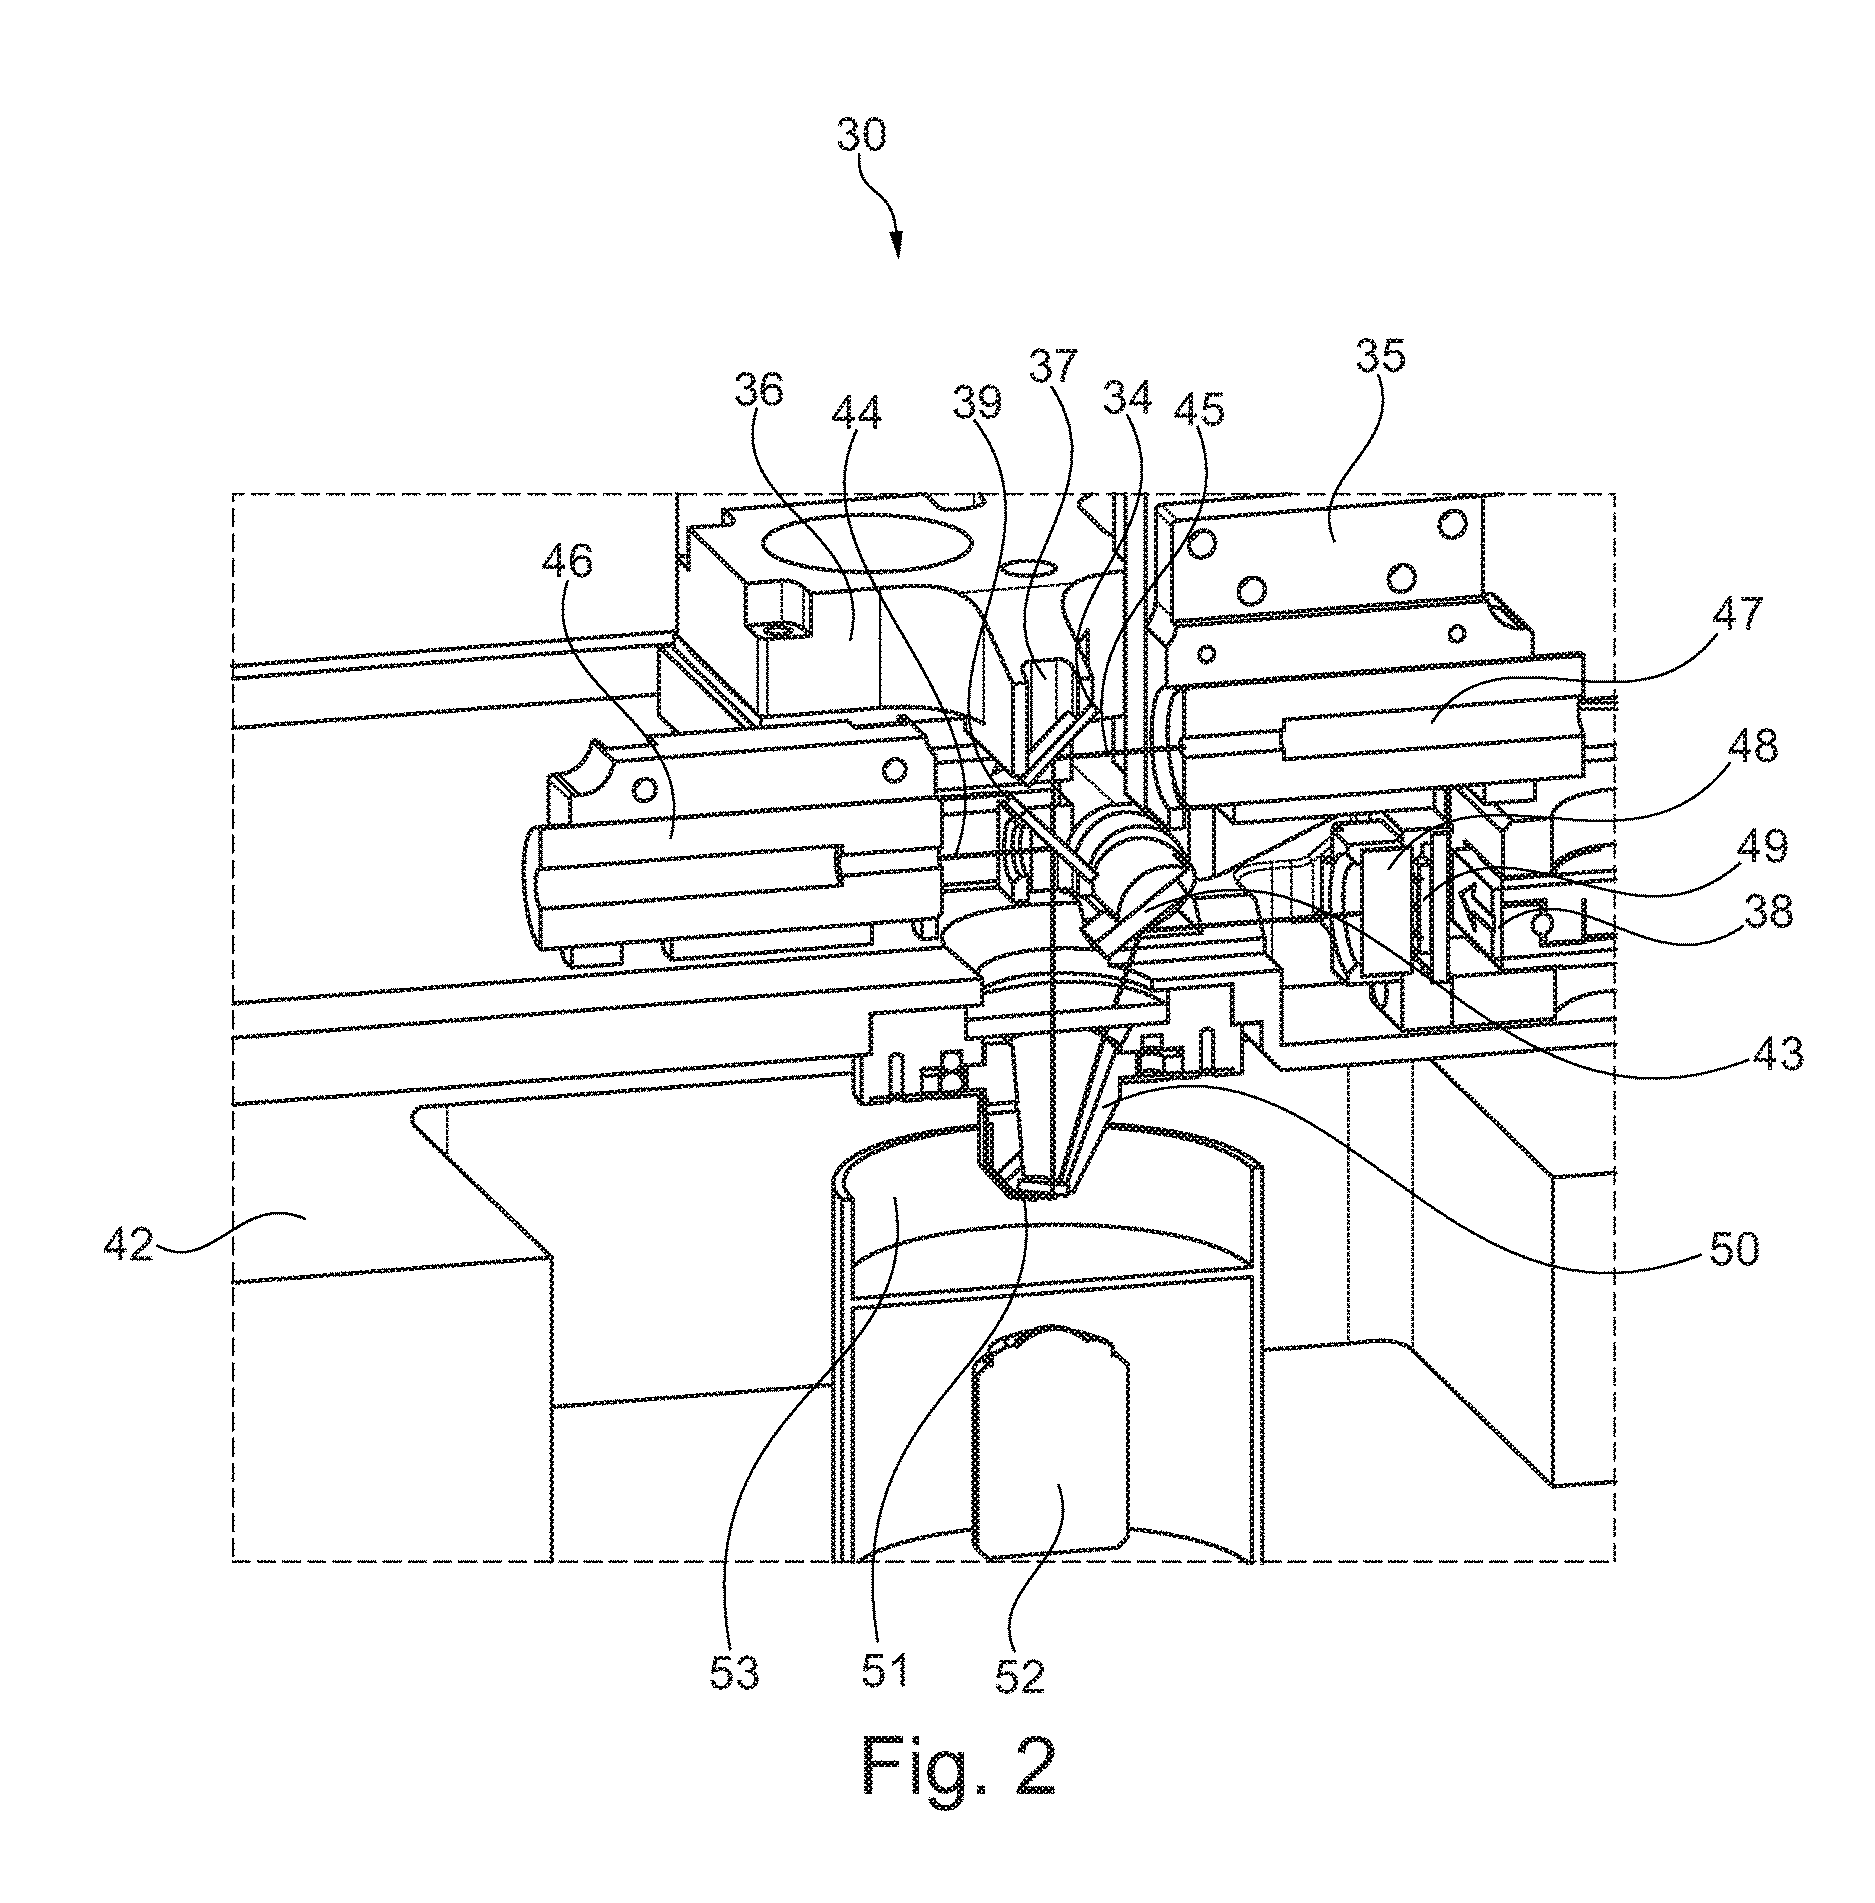 Atomic force microscope measuring device